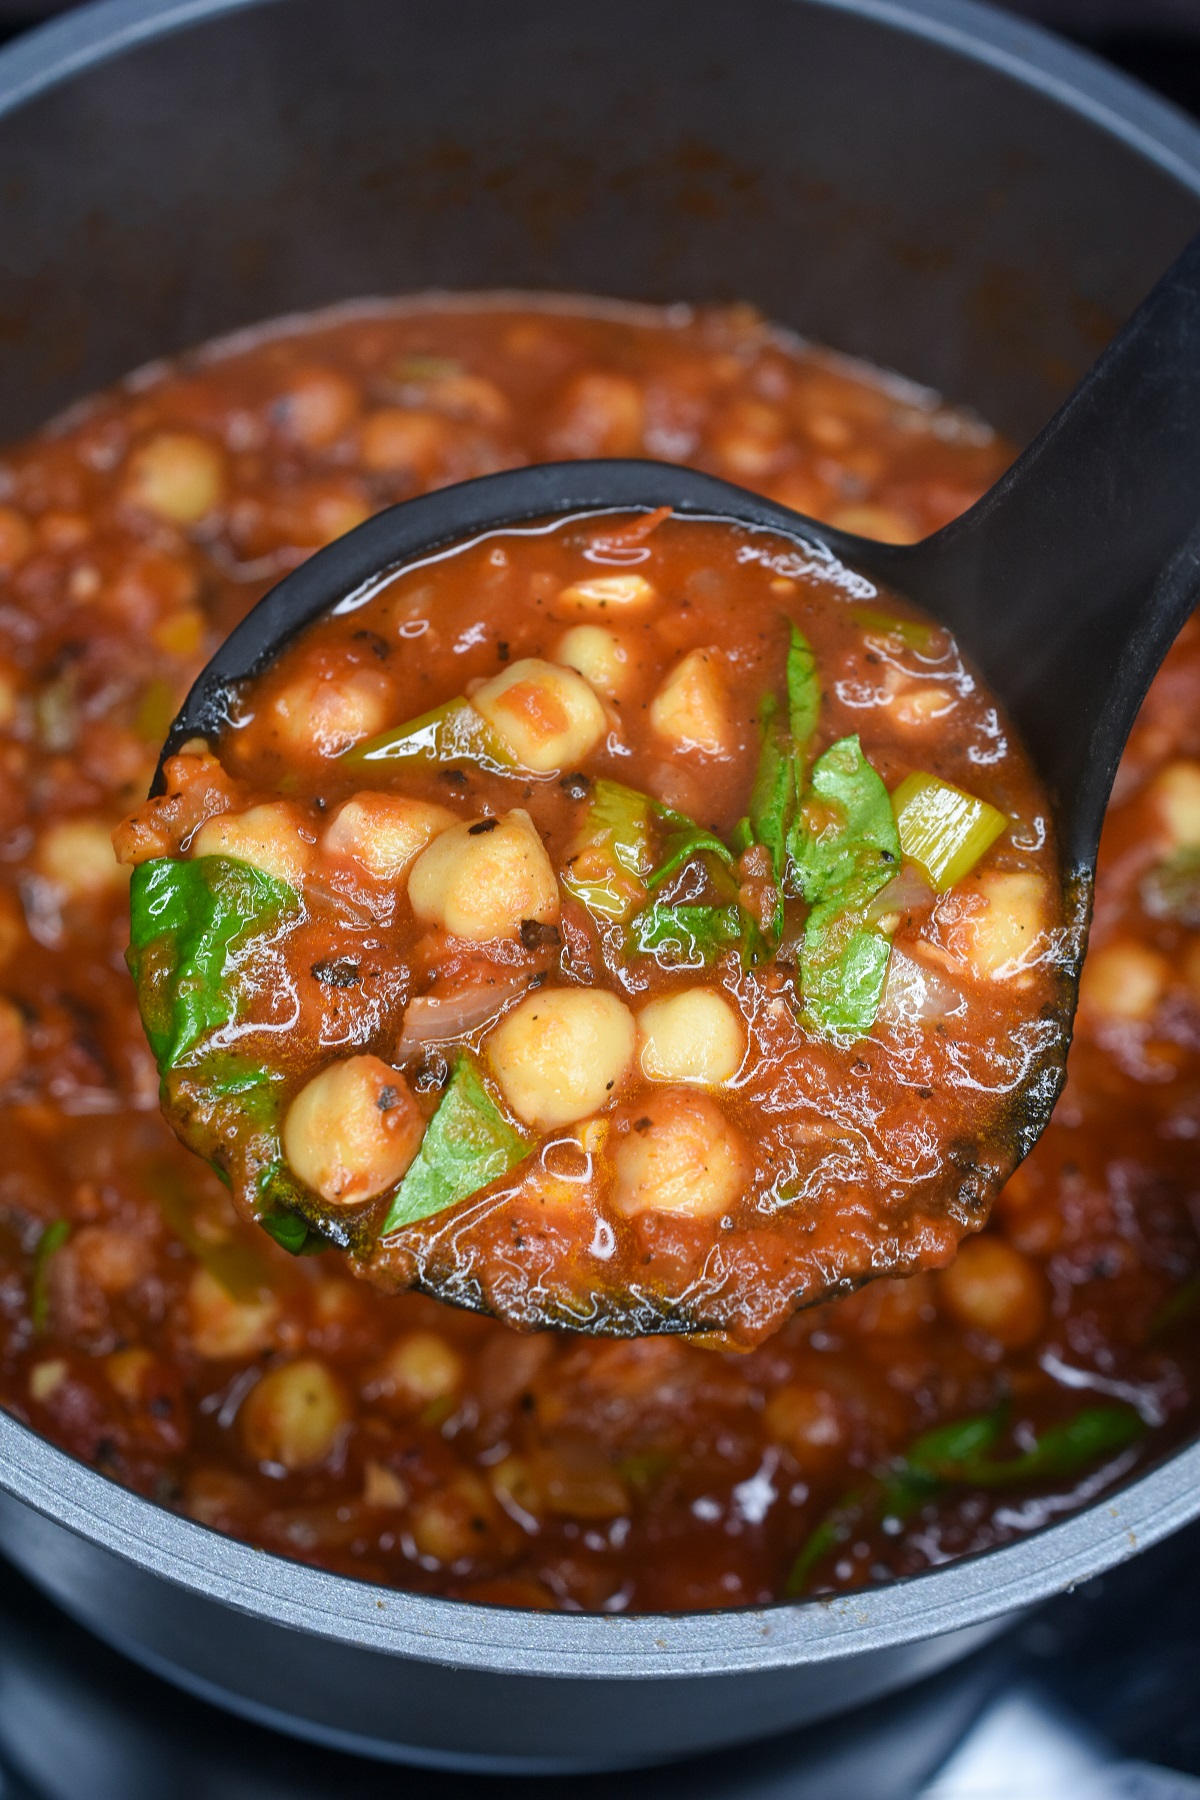 This Chickpea Stew recipe is both vegetarian and vegan. It's easy to customize and take the flavors wherever you want them to go.